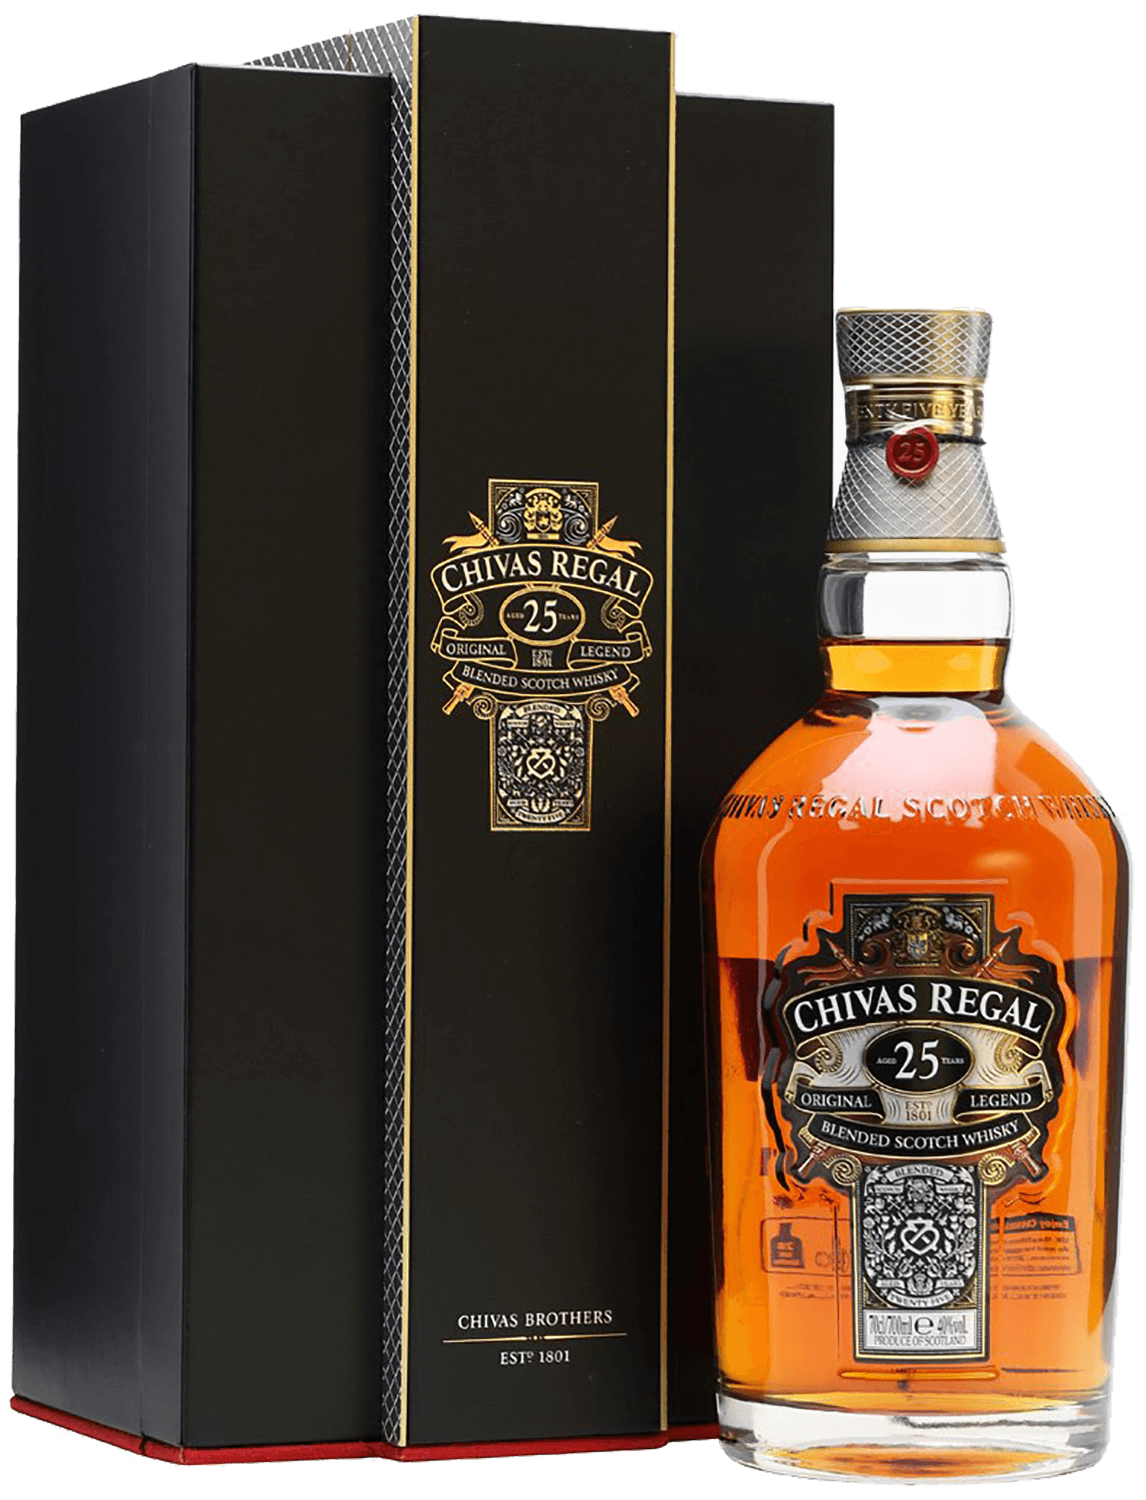 Chivas Regal 25 y.o. blended scotch whisky (gift box) chivas regal extra oloroso sherry cask blended scotch whisky gift box